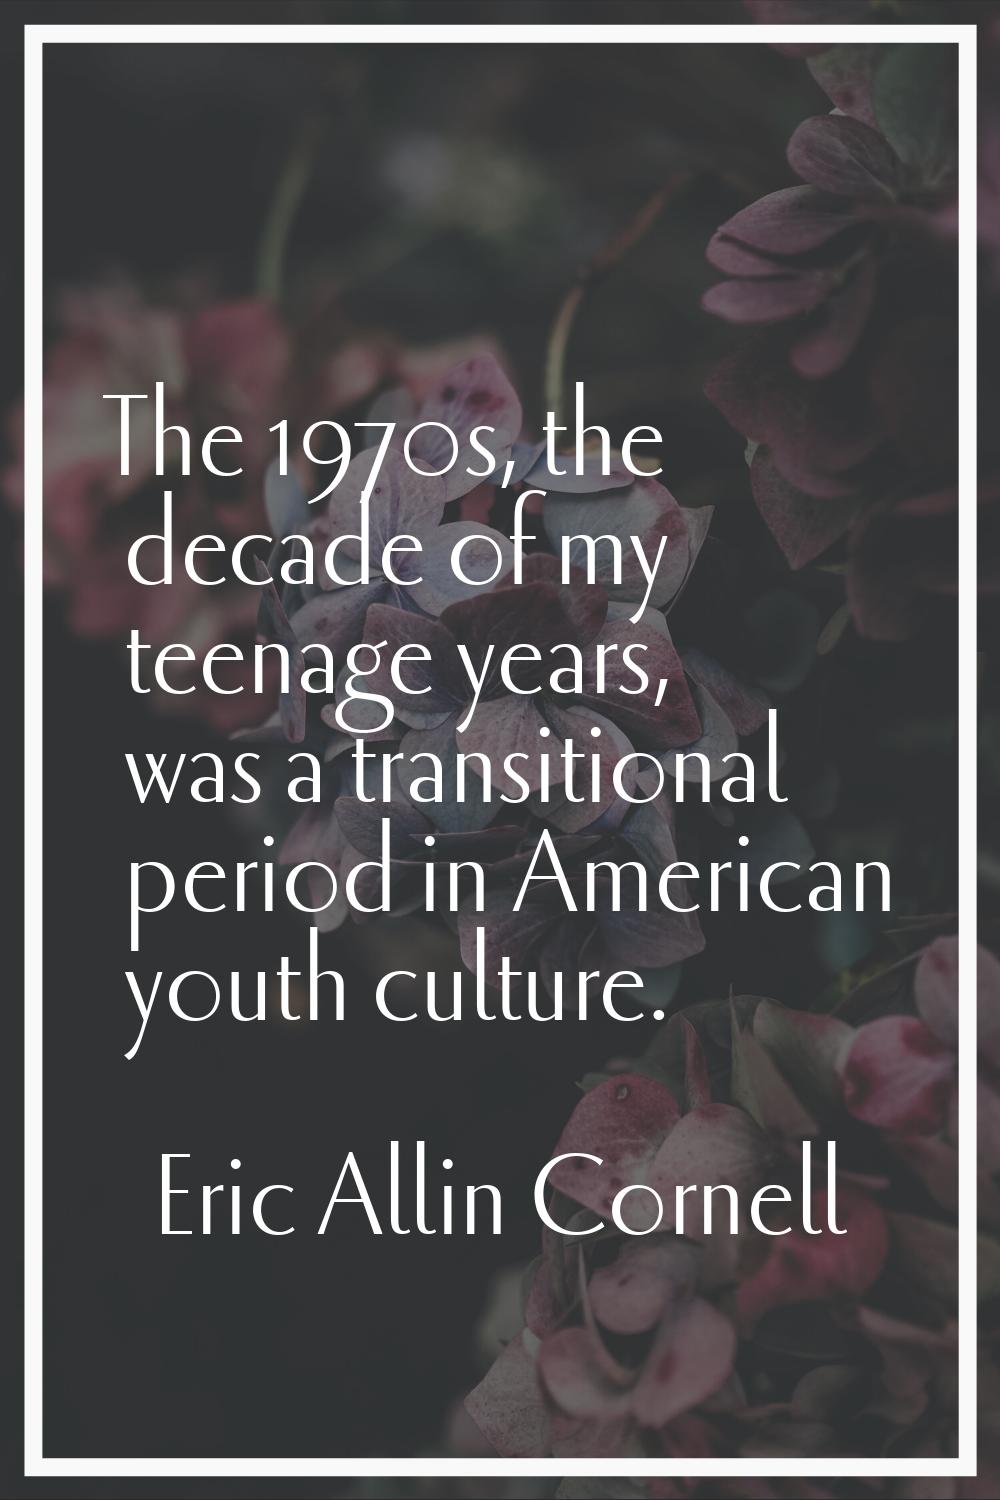 The 1970s, the decade of my teenage years, was a transitional period in American youth culture.